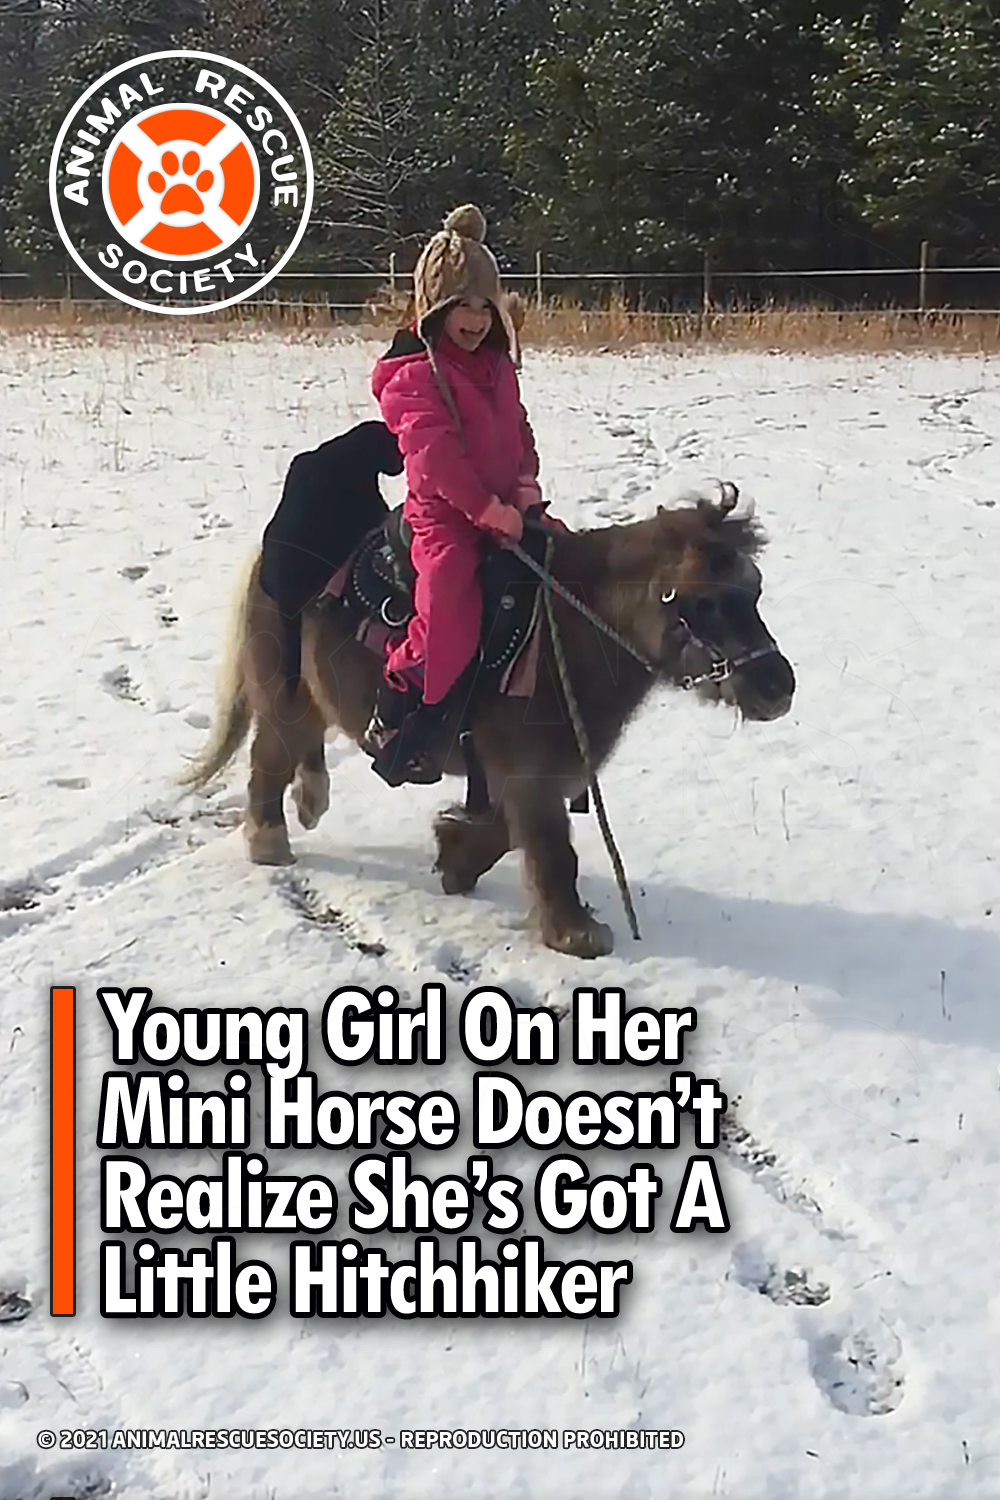 Young Girl On Her Mini Horse Doesn’t Realize She’s Got A Little Hitchhiker